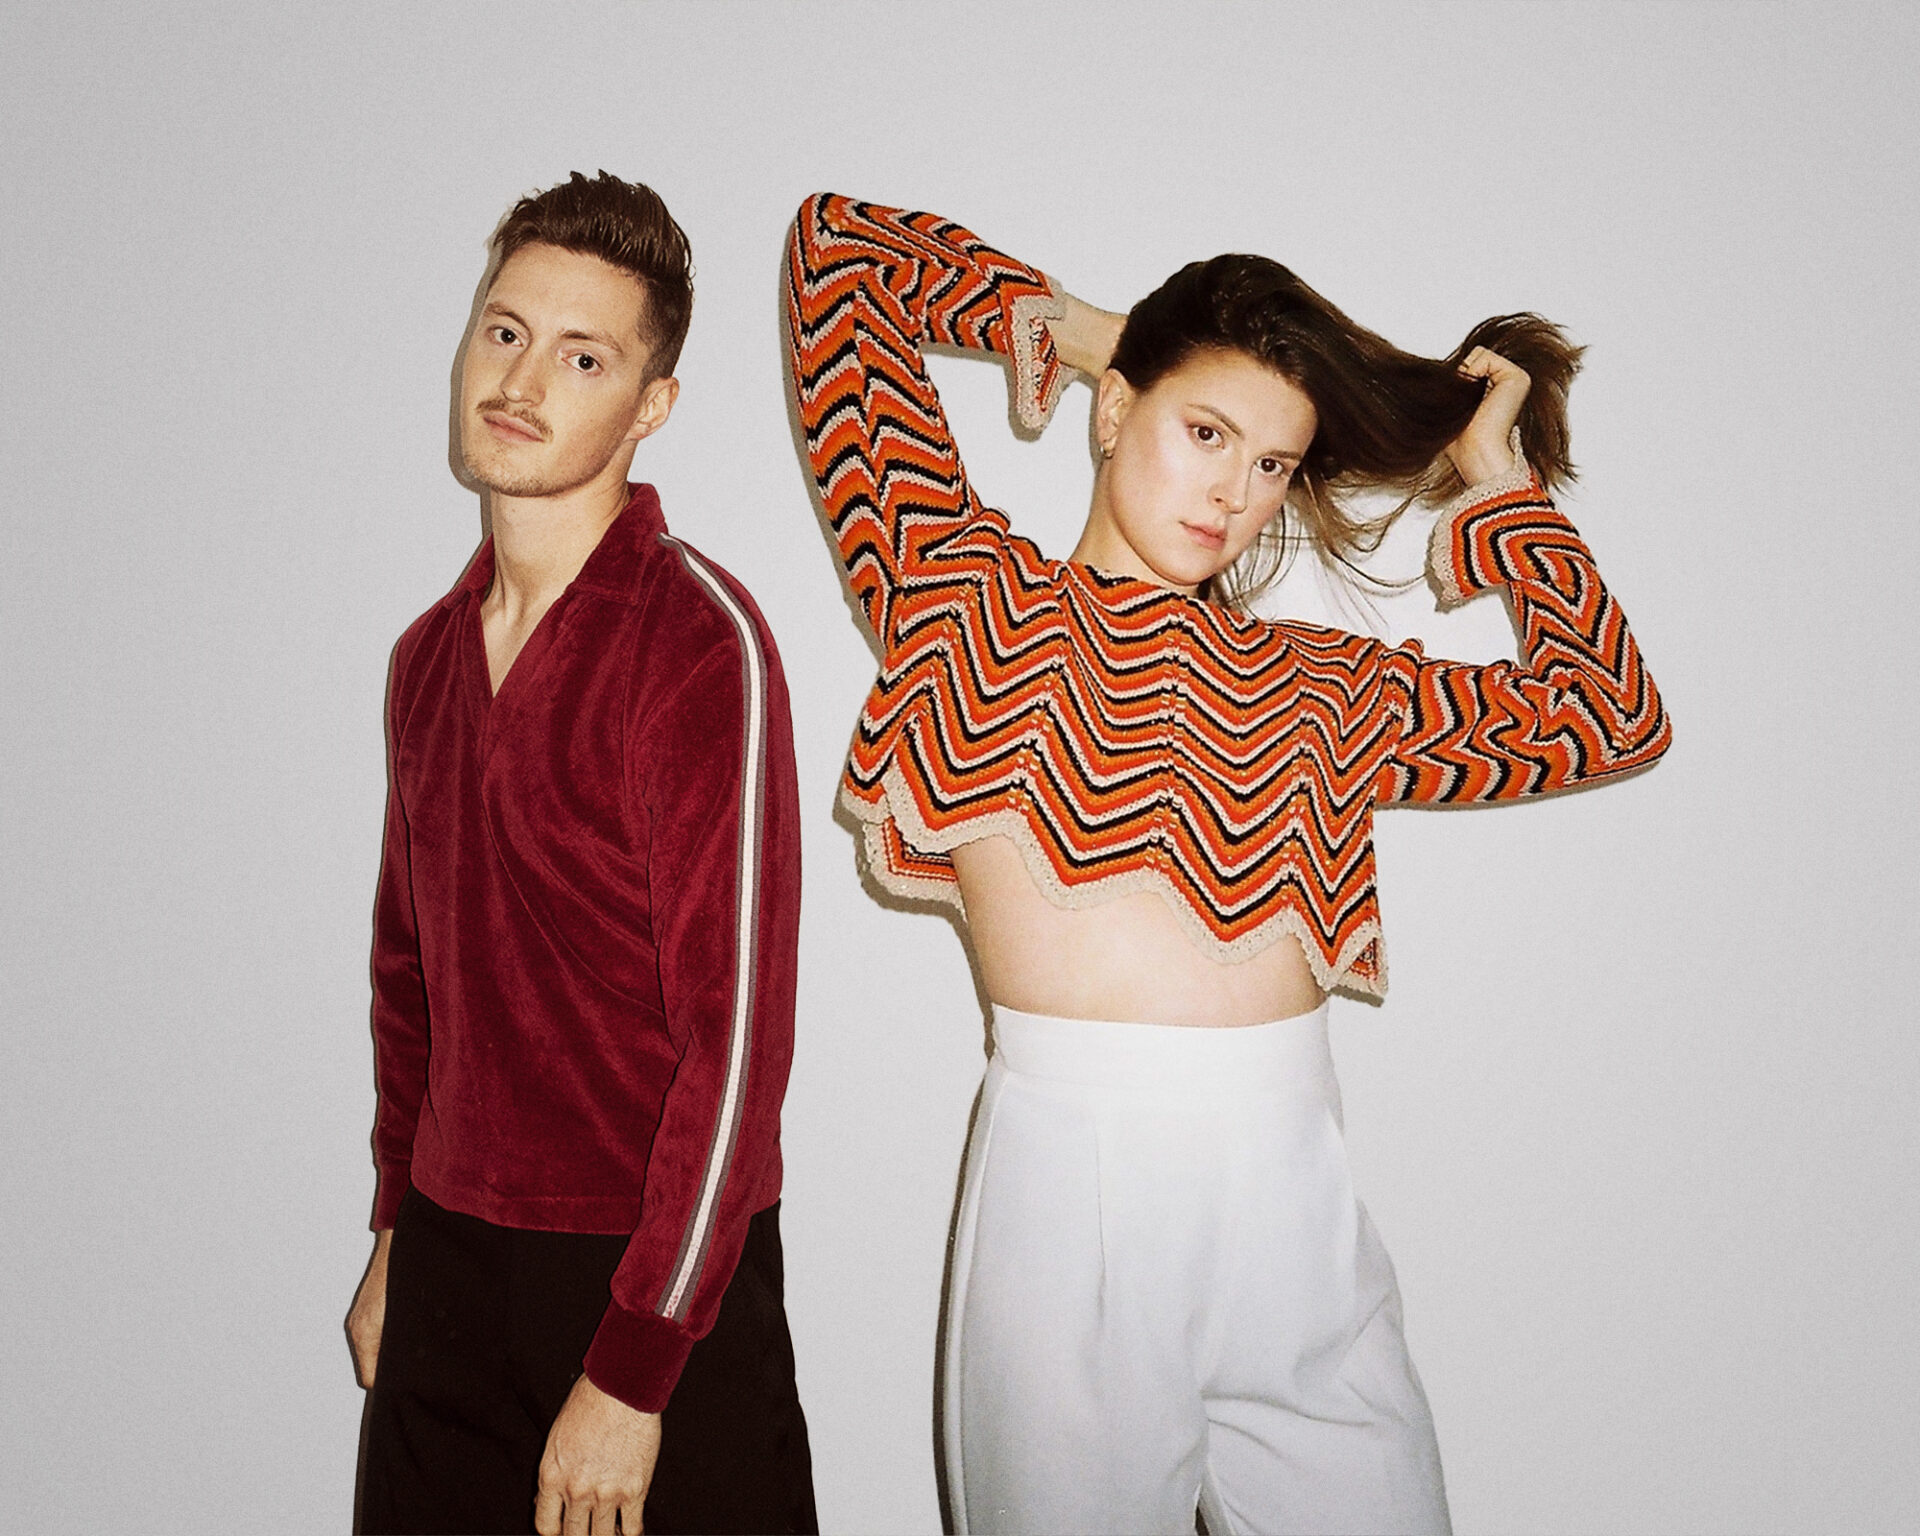 PREMIERE: BHuman create animated video for electro-pop perfection “Safe”